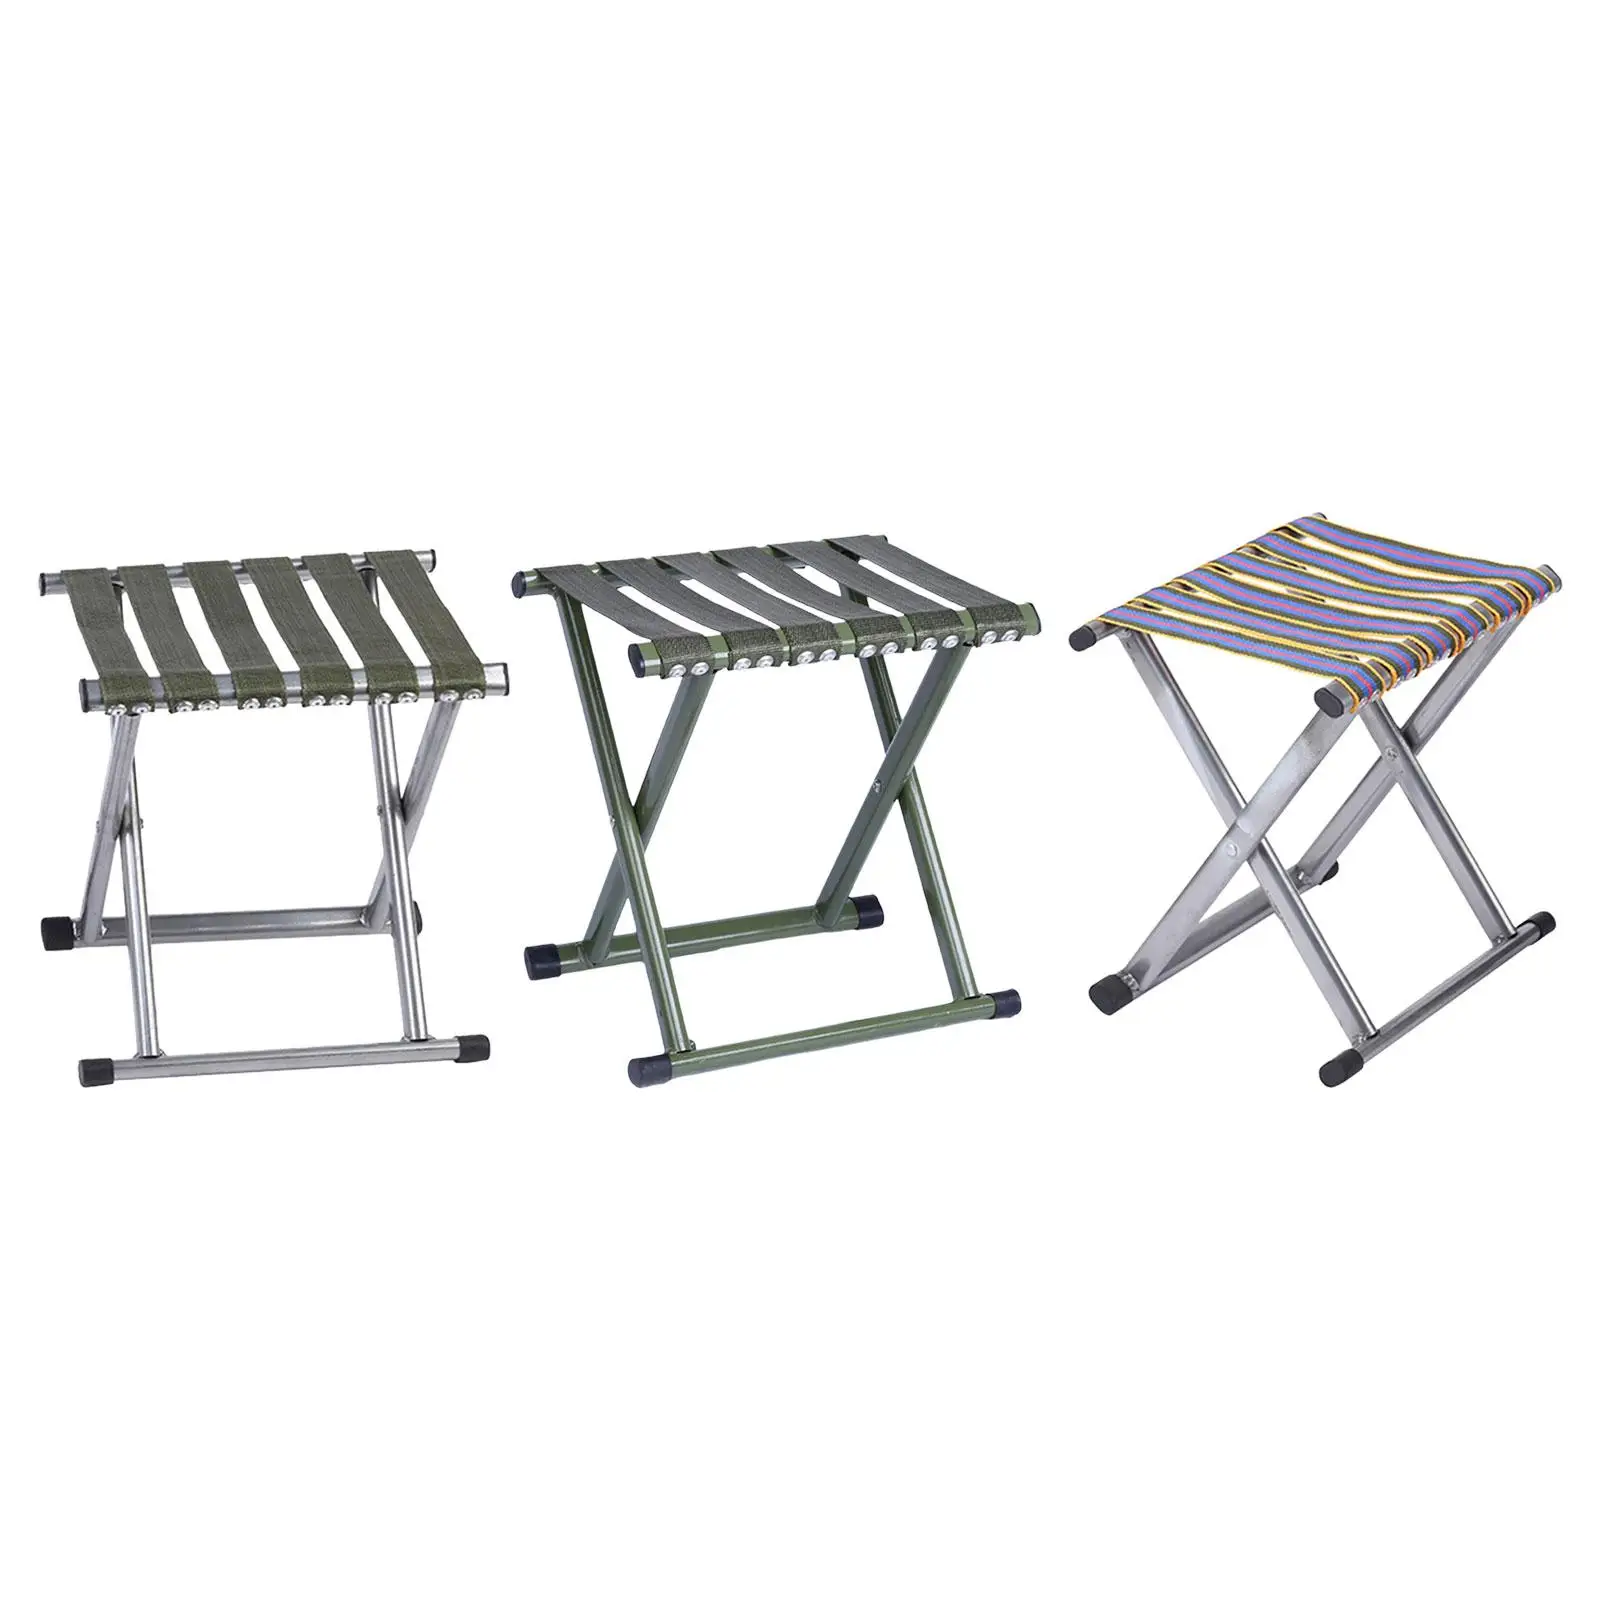 Folding Camping Stool Lightweight Fishing Chair for Fishing Hiking Outdoor